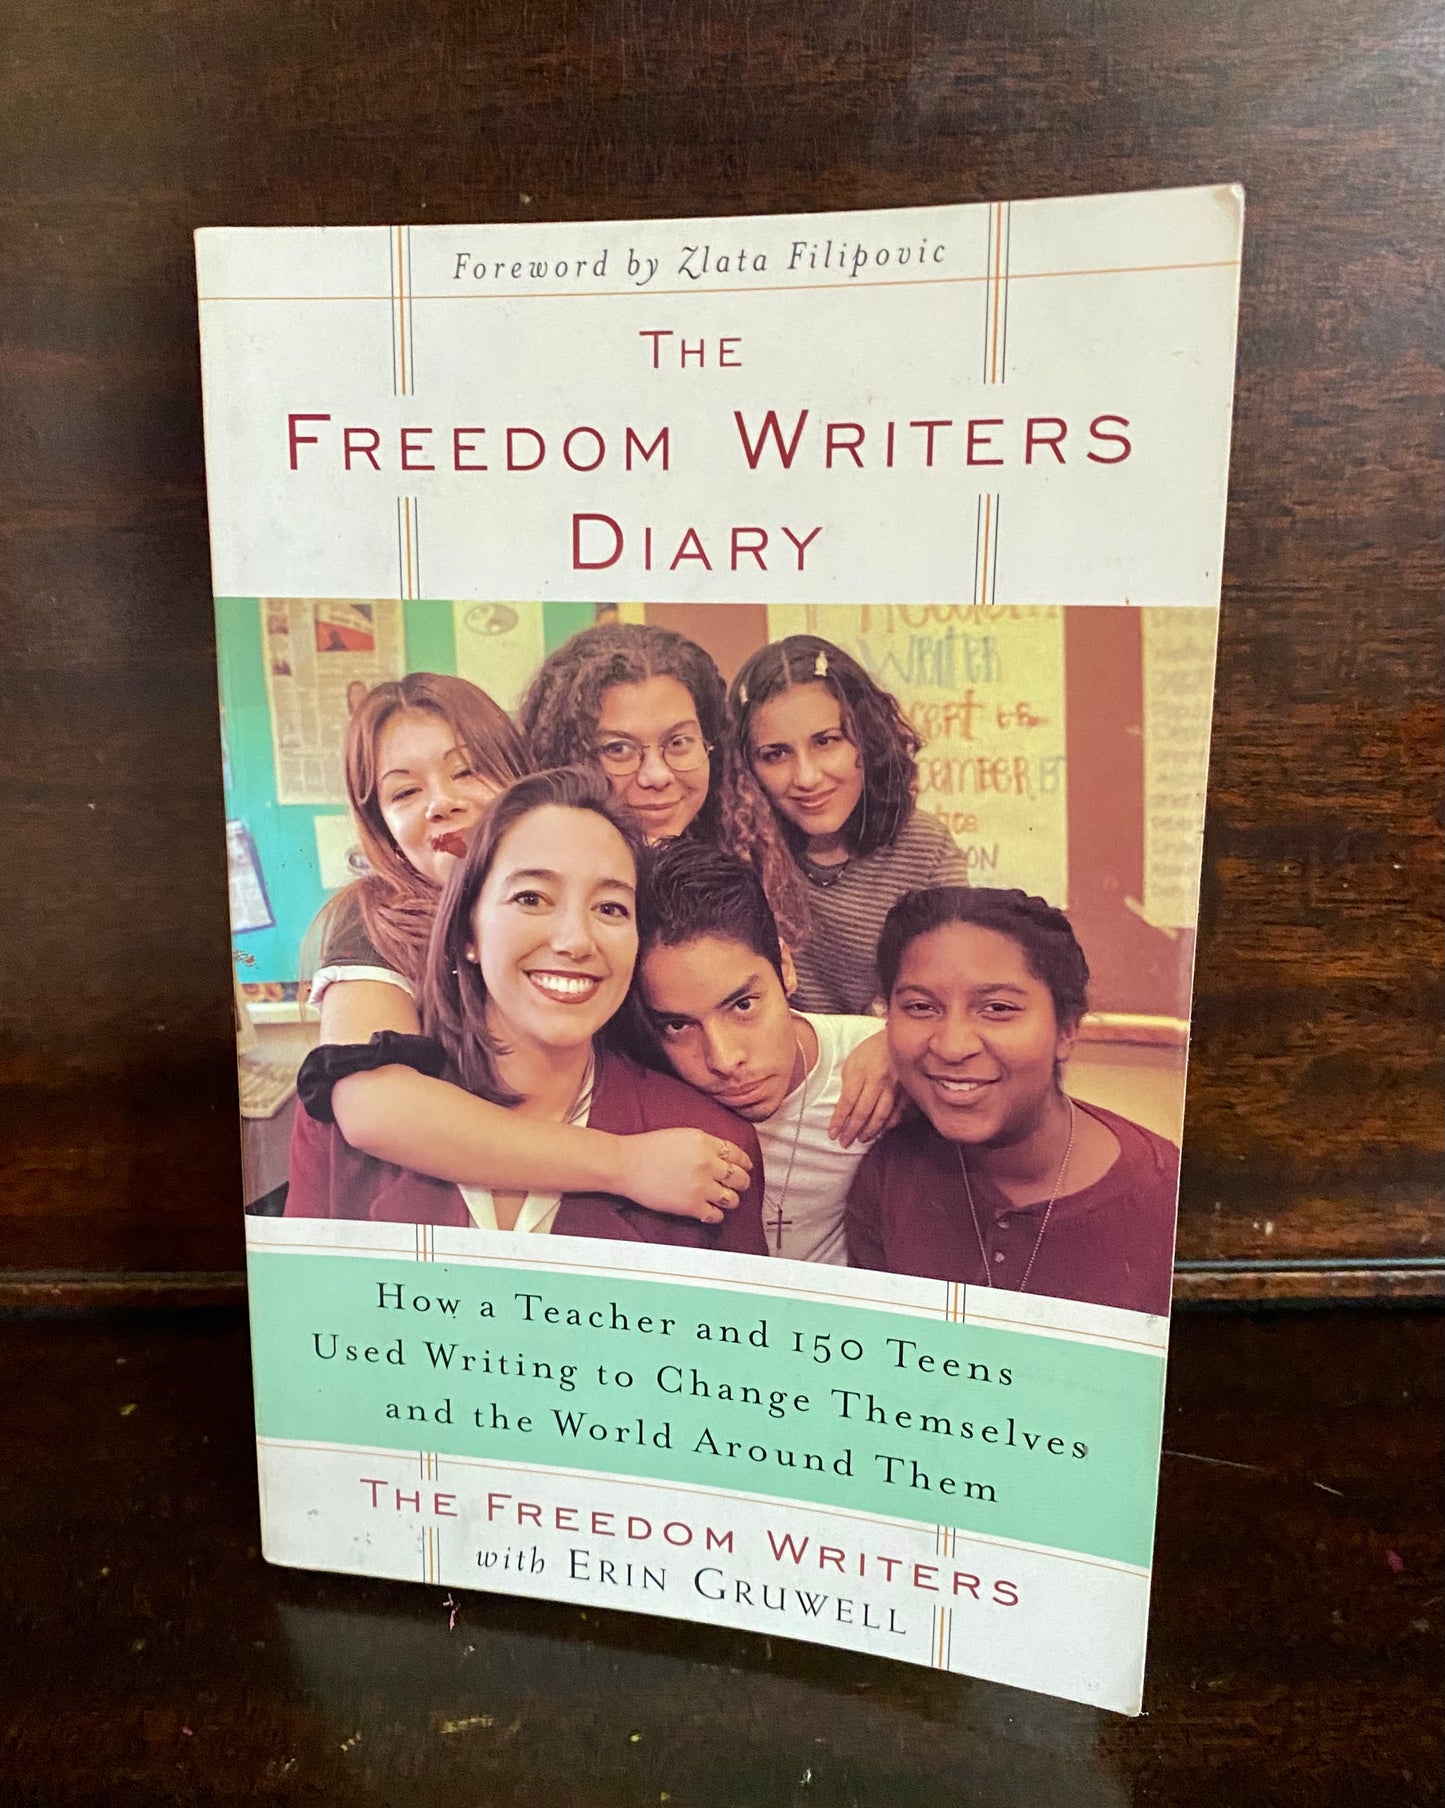 The Freedom Writers Diary with Erin Gruwell